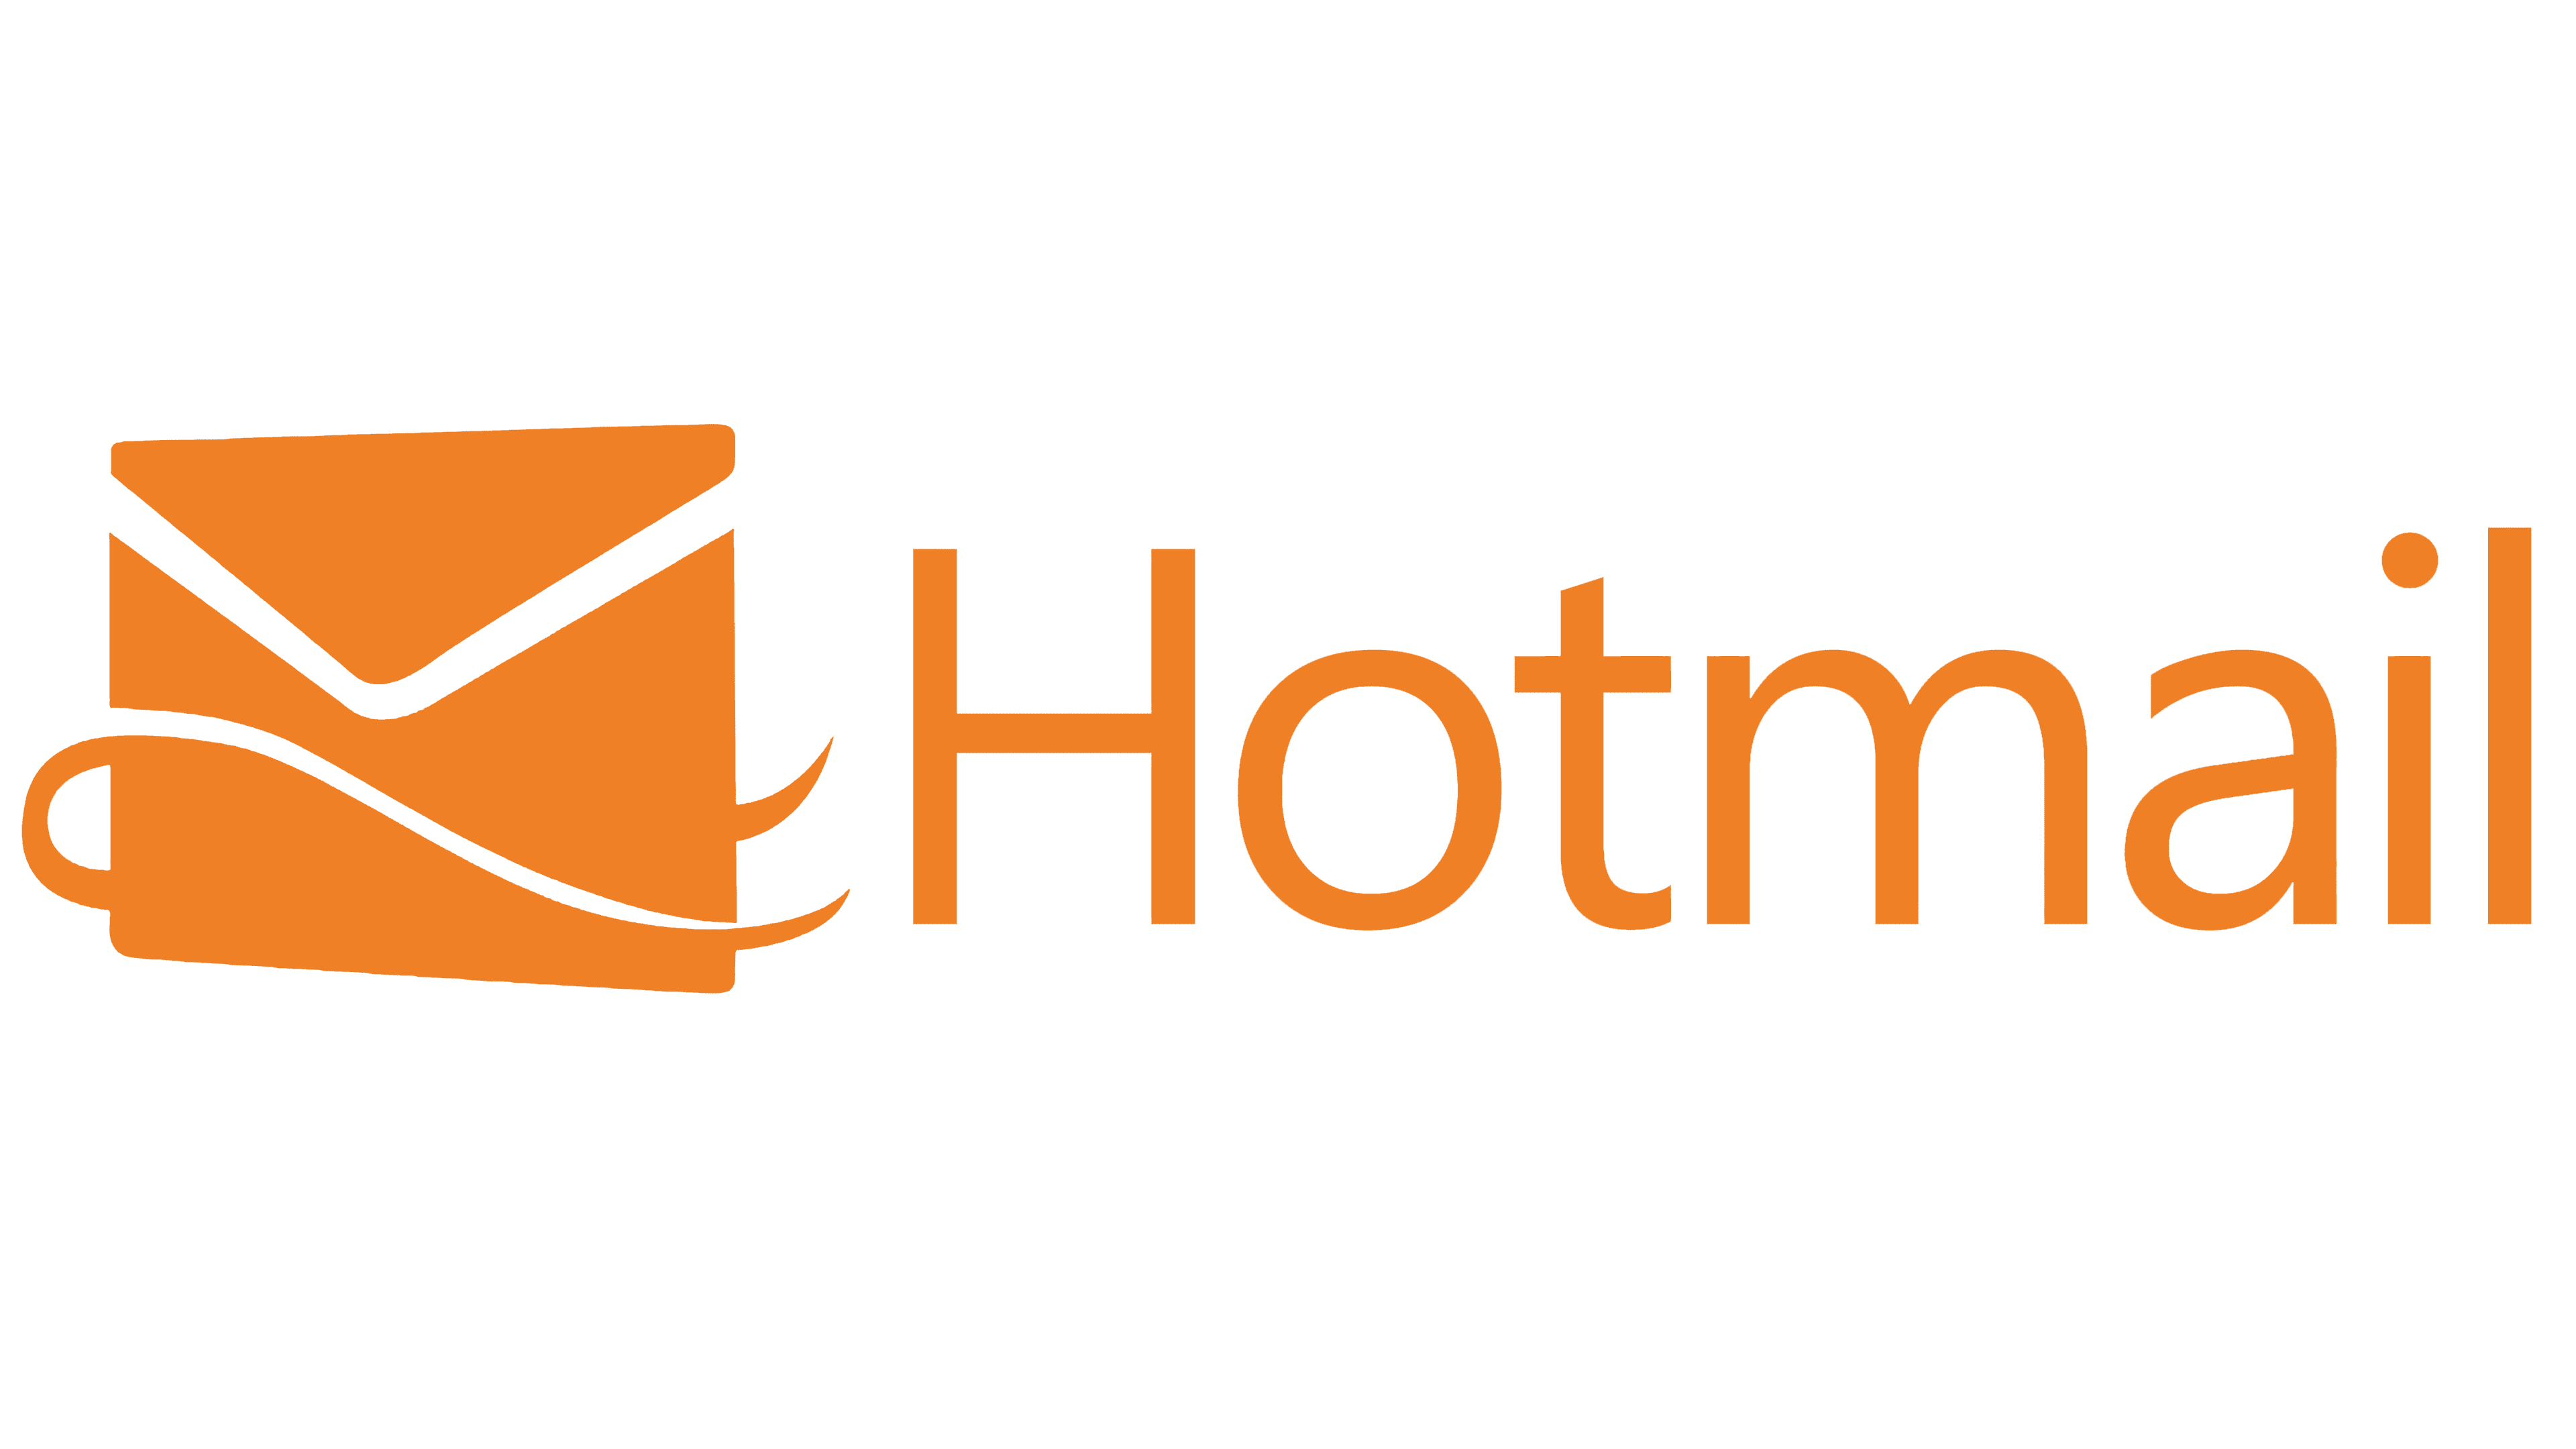 The word "Microsoft" was removed, "Hotmail" was orange,...